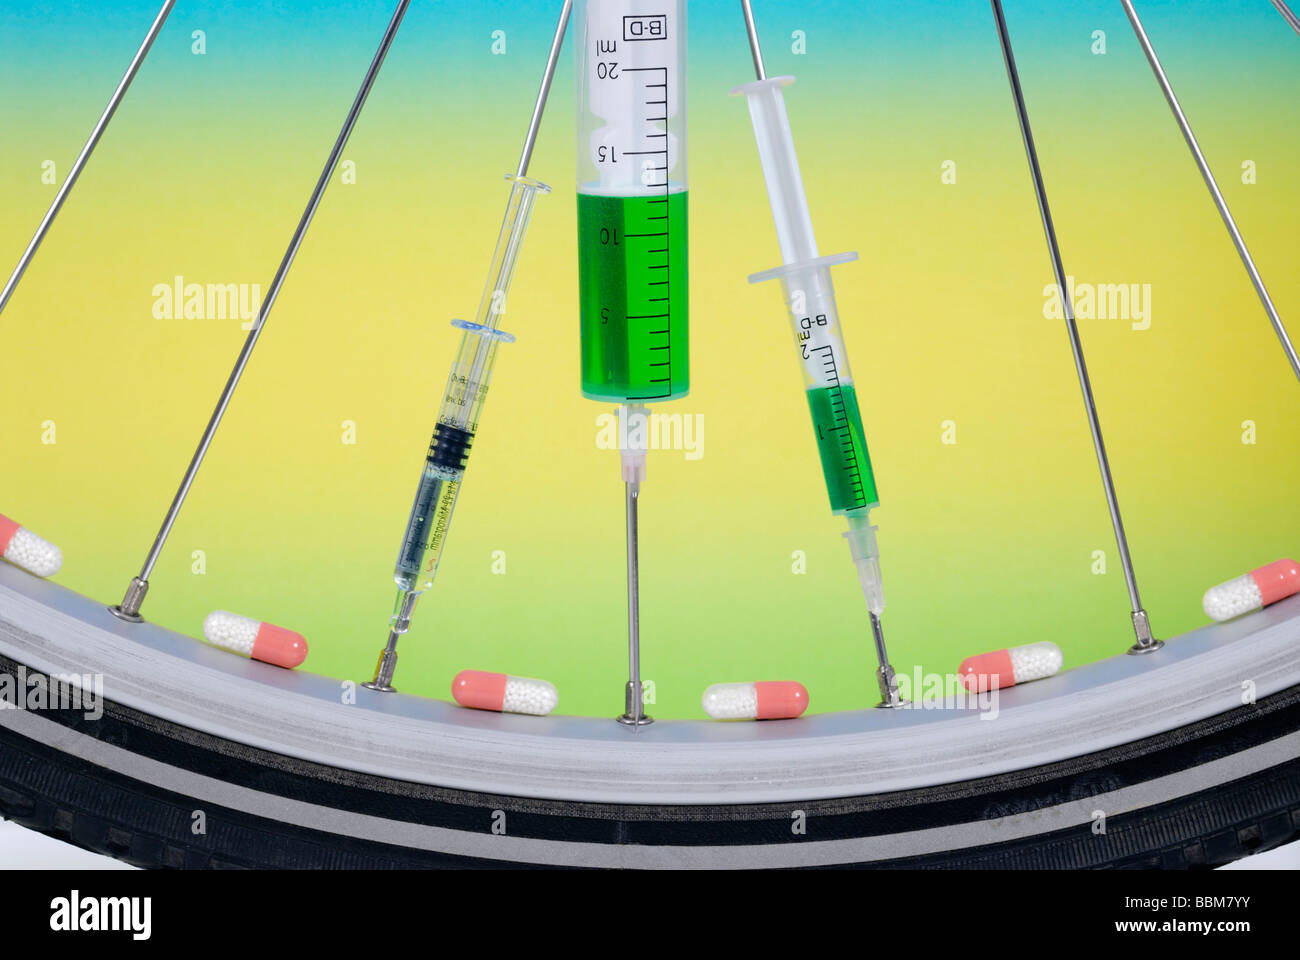 Injection needles in the spokes of a racing cycle tyre, symbolic picture for doping in cycling Stock Photo